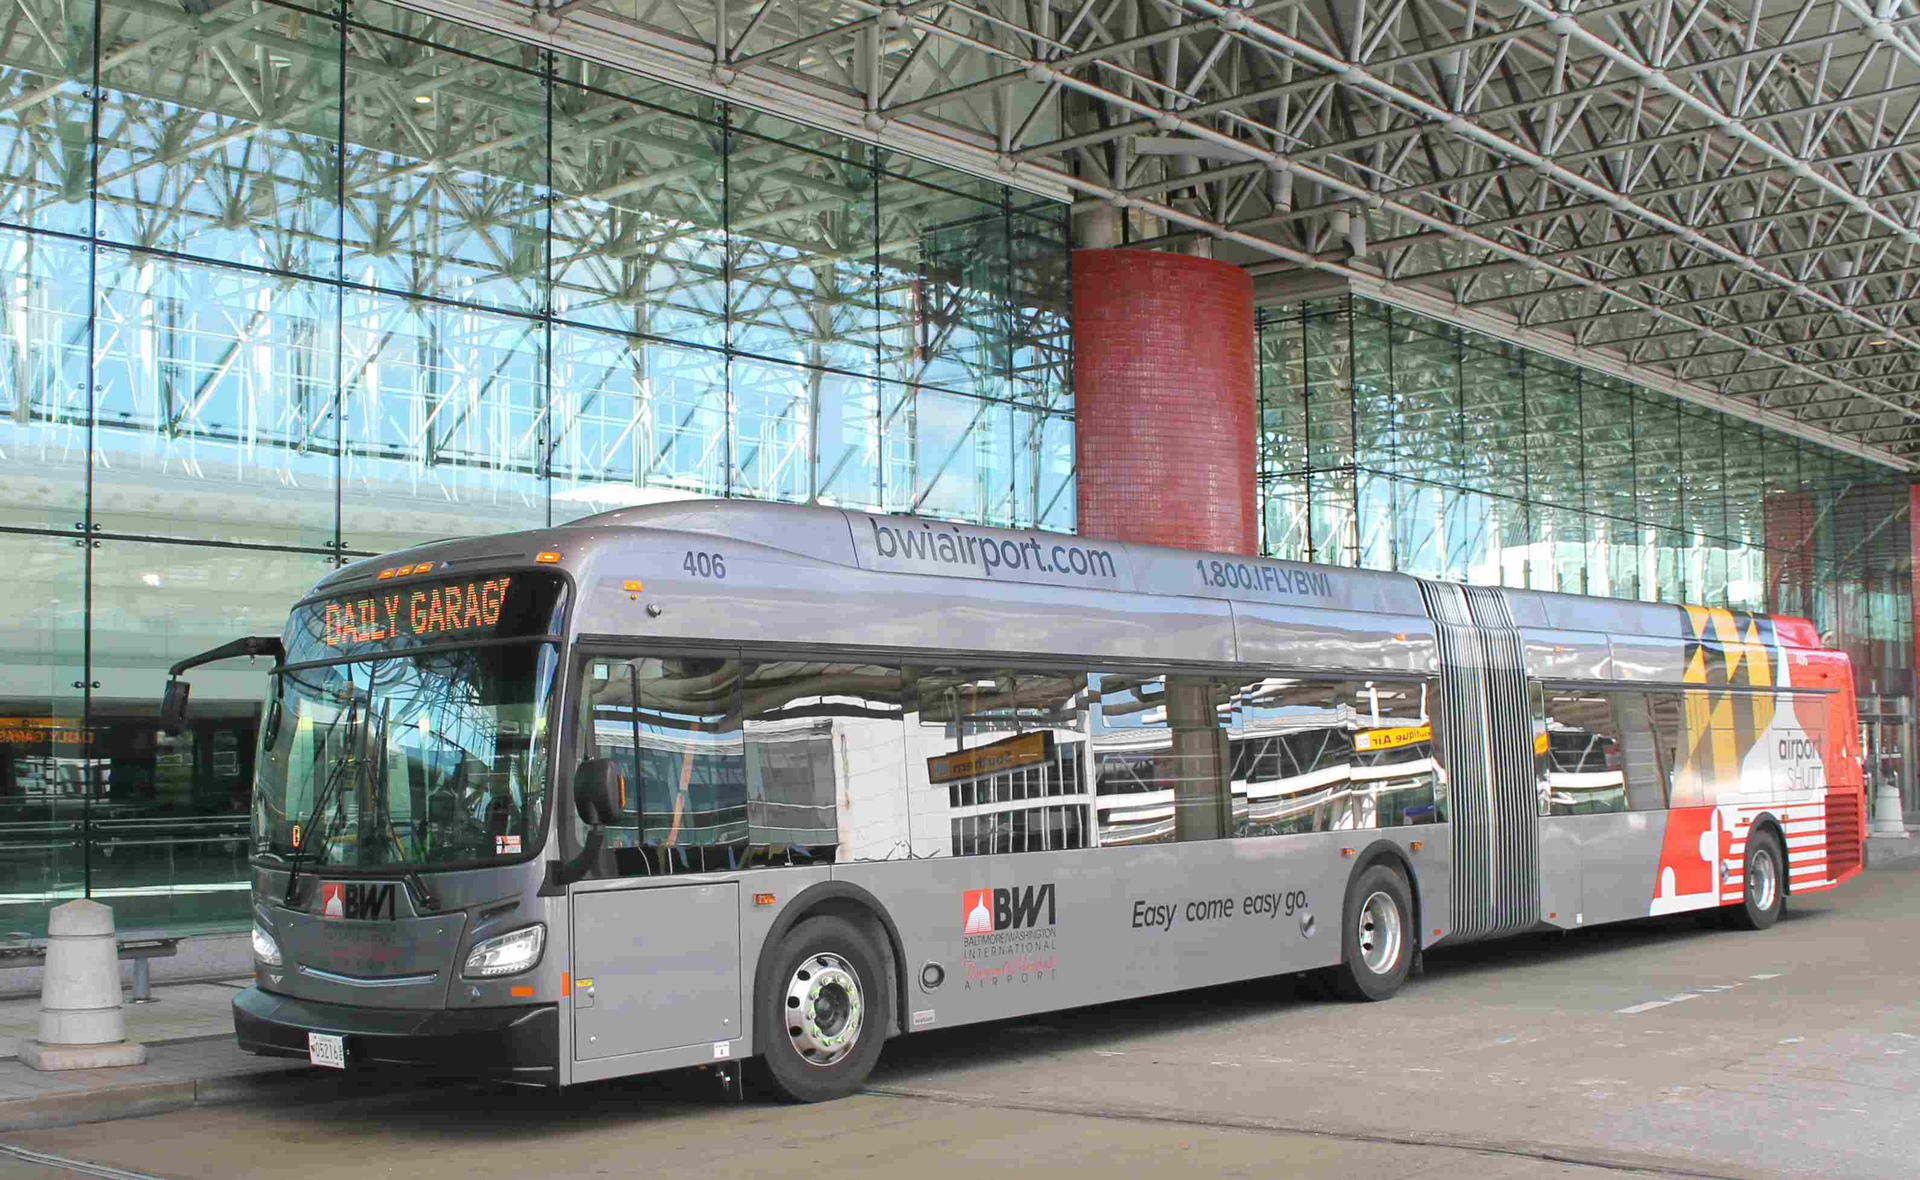 bwi airport shuttle service